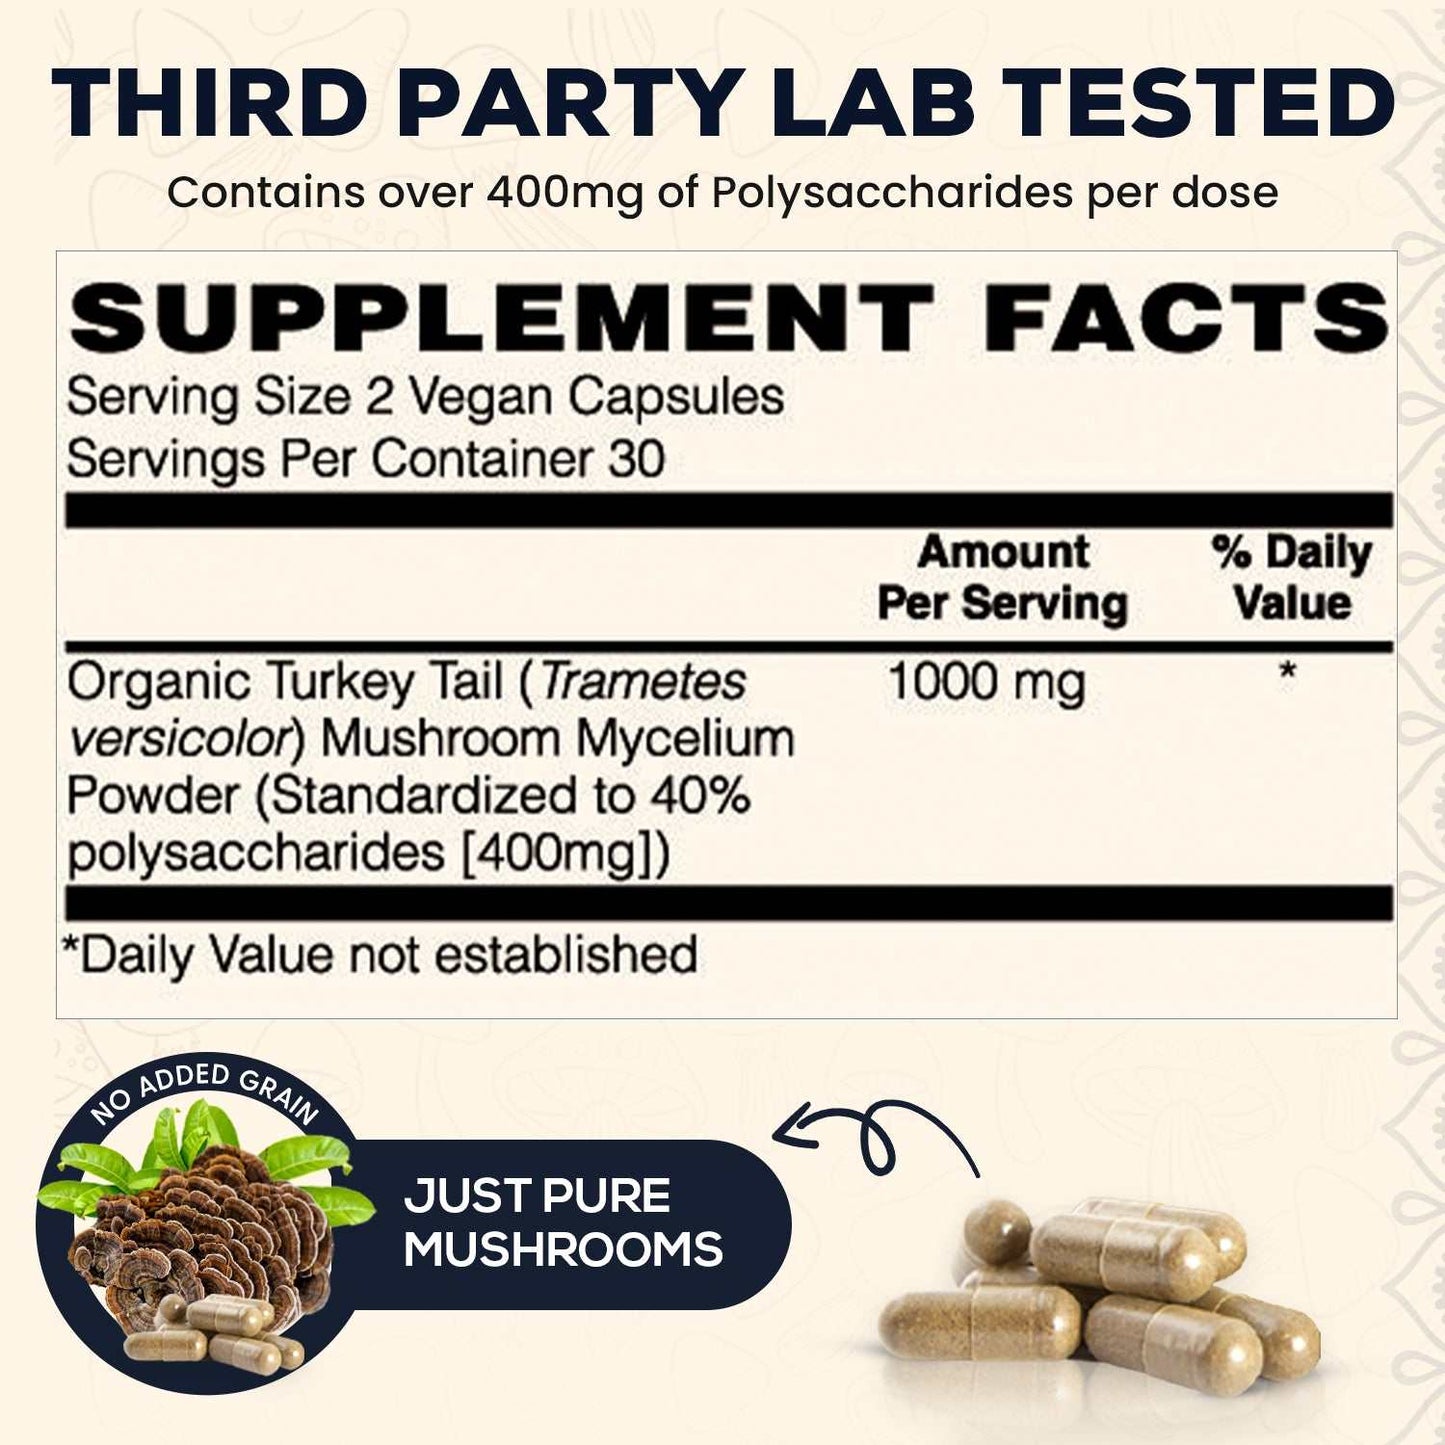 the nutrition label for Dark Earth Farms Organic Turkey Tail Mushroom Capsules, featuring a detailed breakdown of the supplement's ingredients and nutritional information. The label lists the serving size, number of servings per container.  The label also includes information about the supplement's organic and gluten-free certification, GMP certification, and recommended daily intake. The label provides important information to help consumers make informed choices about using the supplement